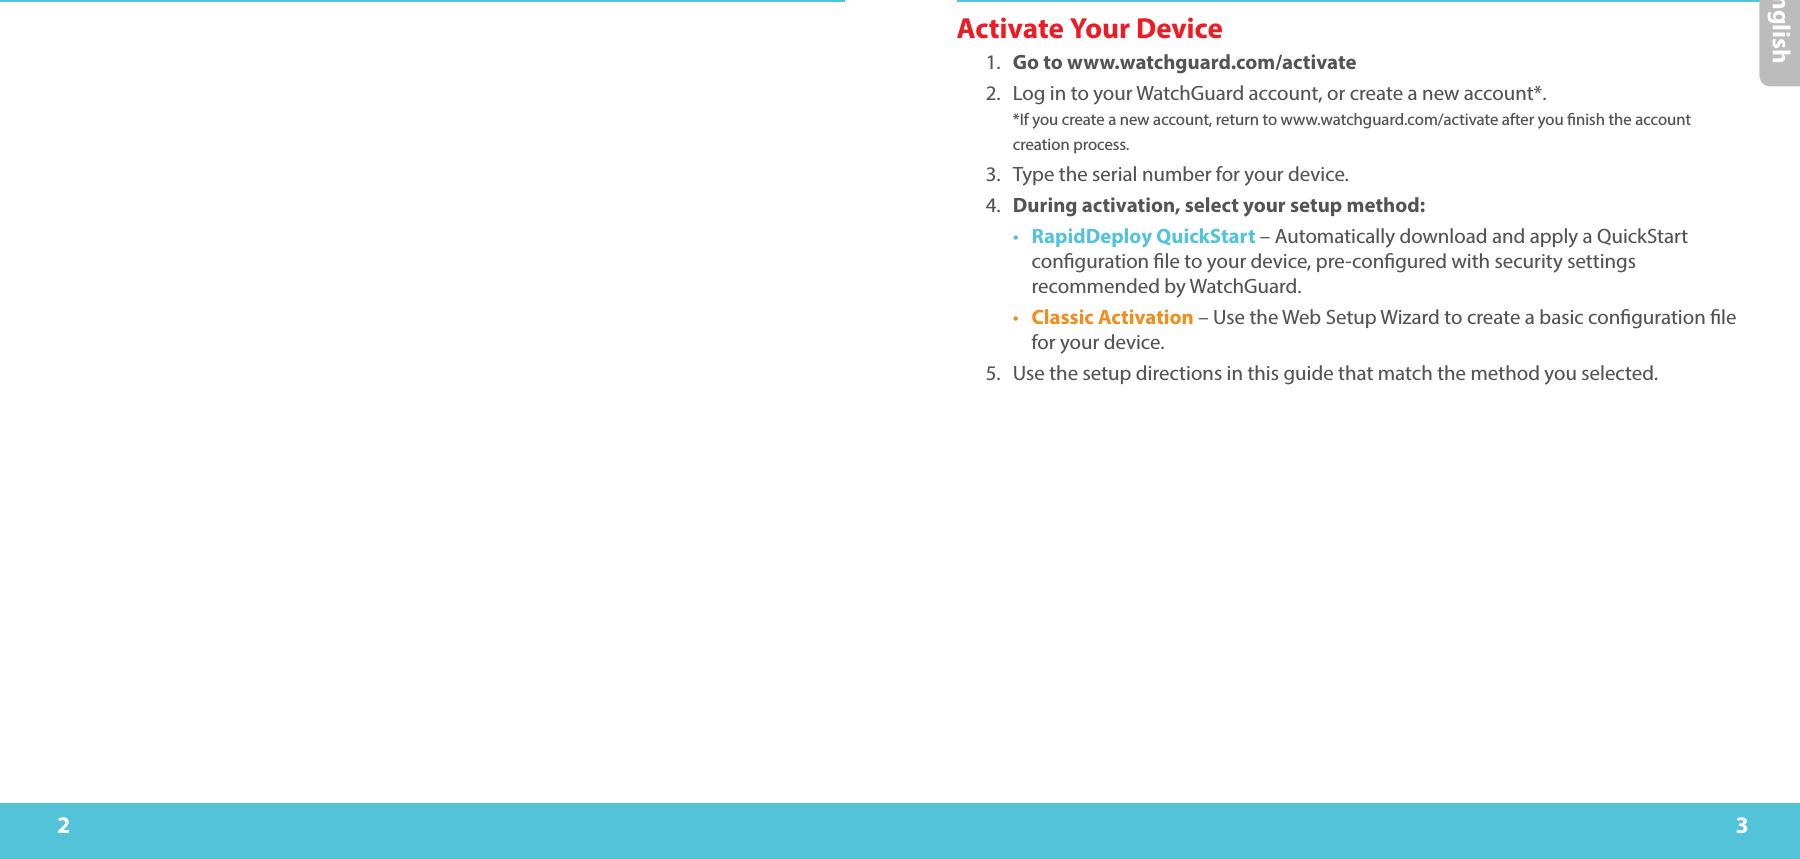 2 3Activate Your Device1.  Go to www.watchguard.com/activate 2.  Log in to your WatchGuard account, or create a new account*.  *If you create a new account, return to www.watchguard.com/activate after you nish the account creation process.3.  Type the serial number for your device.4.  During activation, select your setup method:•  RapidDeploy QuickStart – Automatically download and apply a QuickStart conguration le to your device, pre-congured with security settings recommended by WatchGuard.•  Classic Activation – Use the Web Setup Wizard to create a basic conguration le for your device.5.  Use the setup directions in this guide that match the method you selected.English